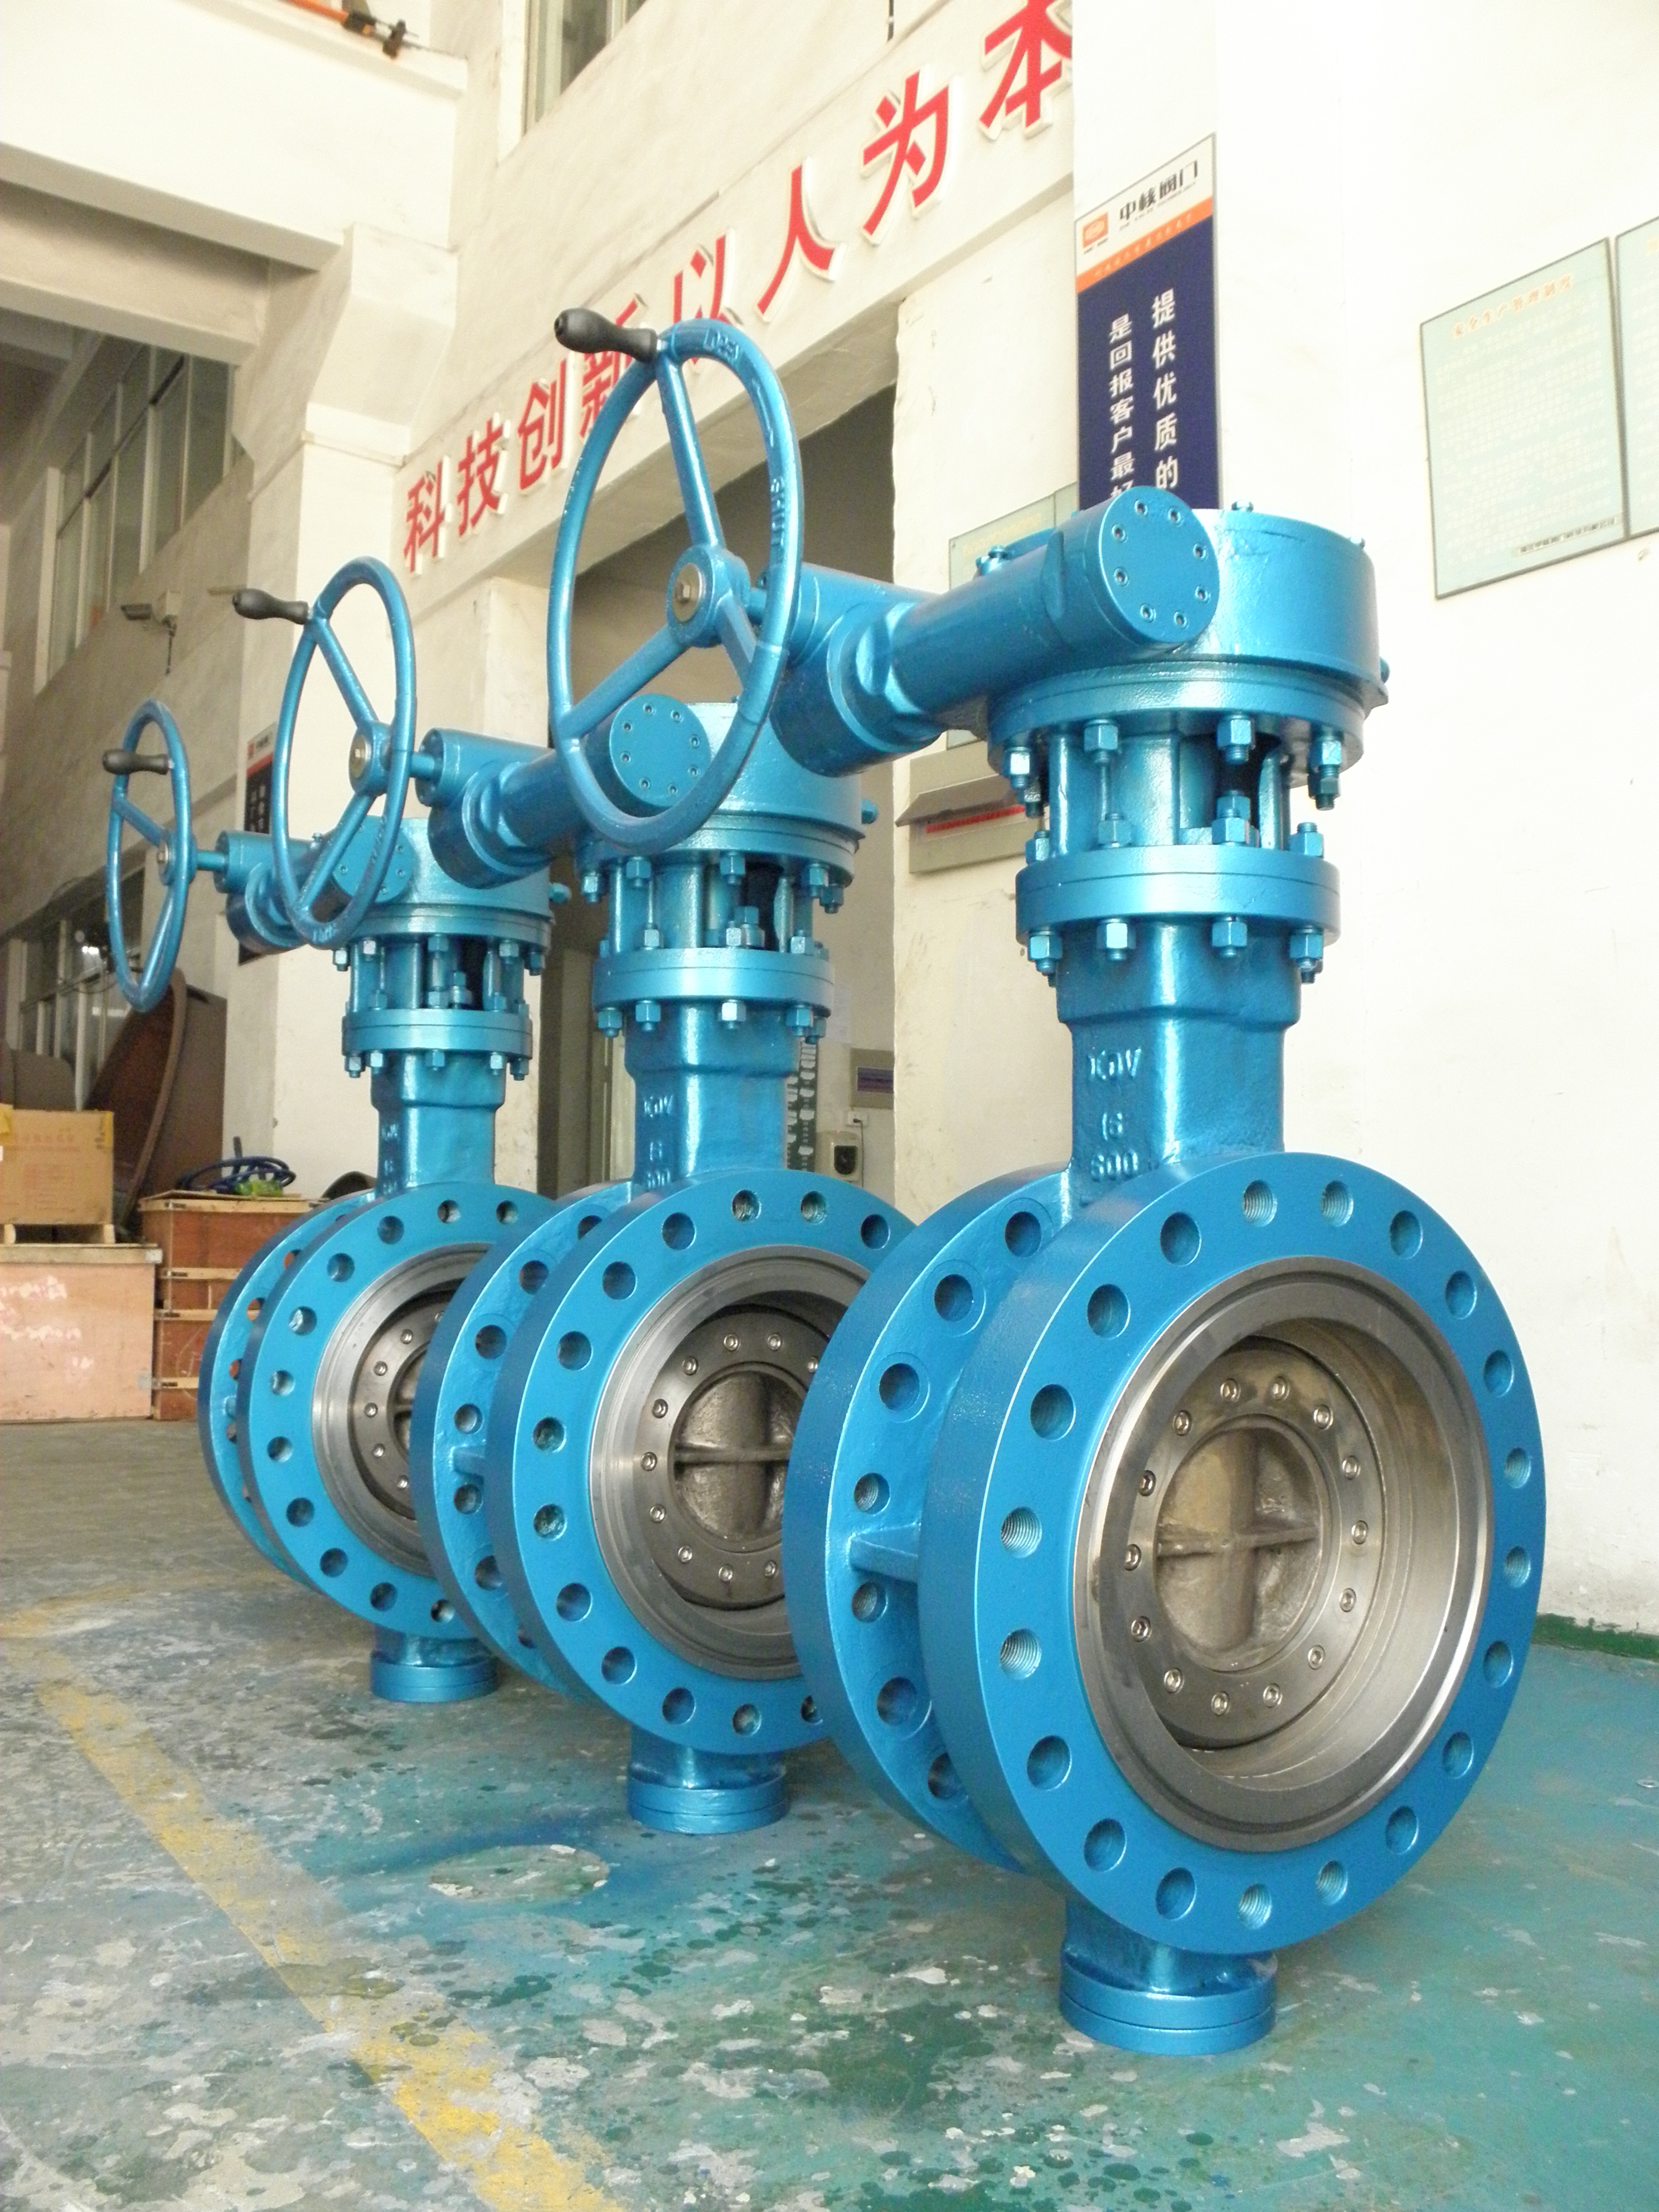 High-performance butterfly valve factory manufactured and exported to Europe